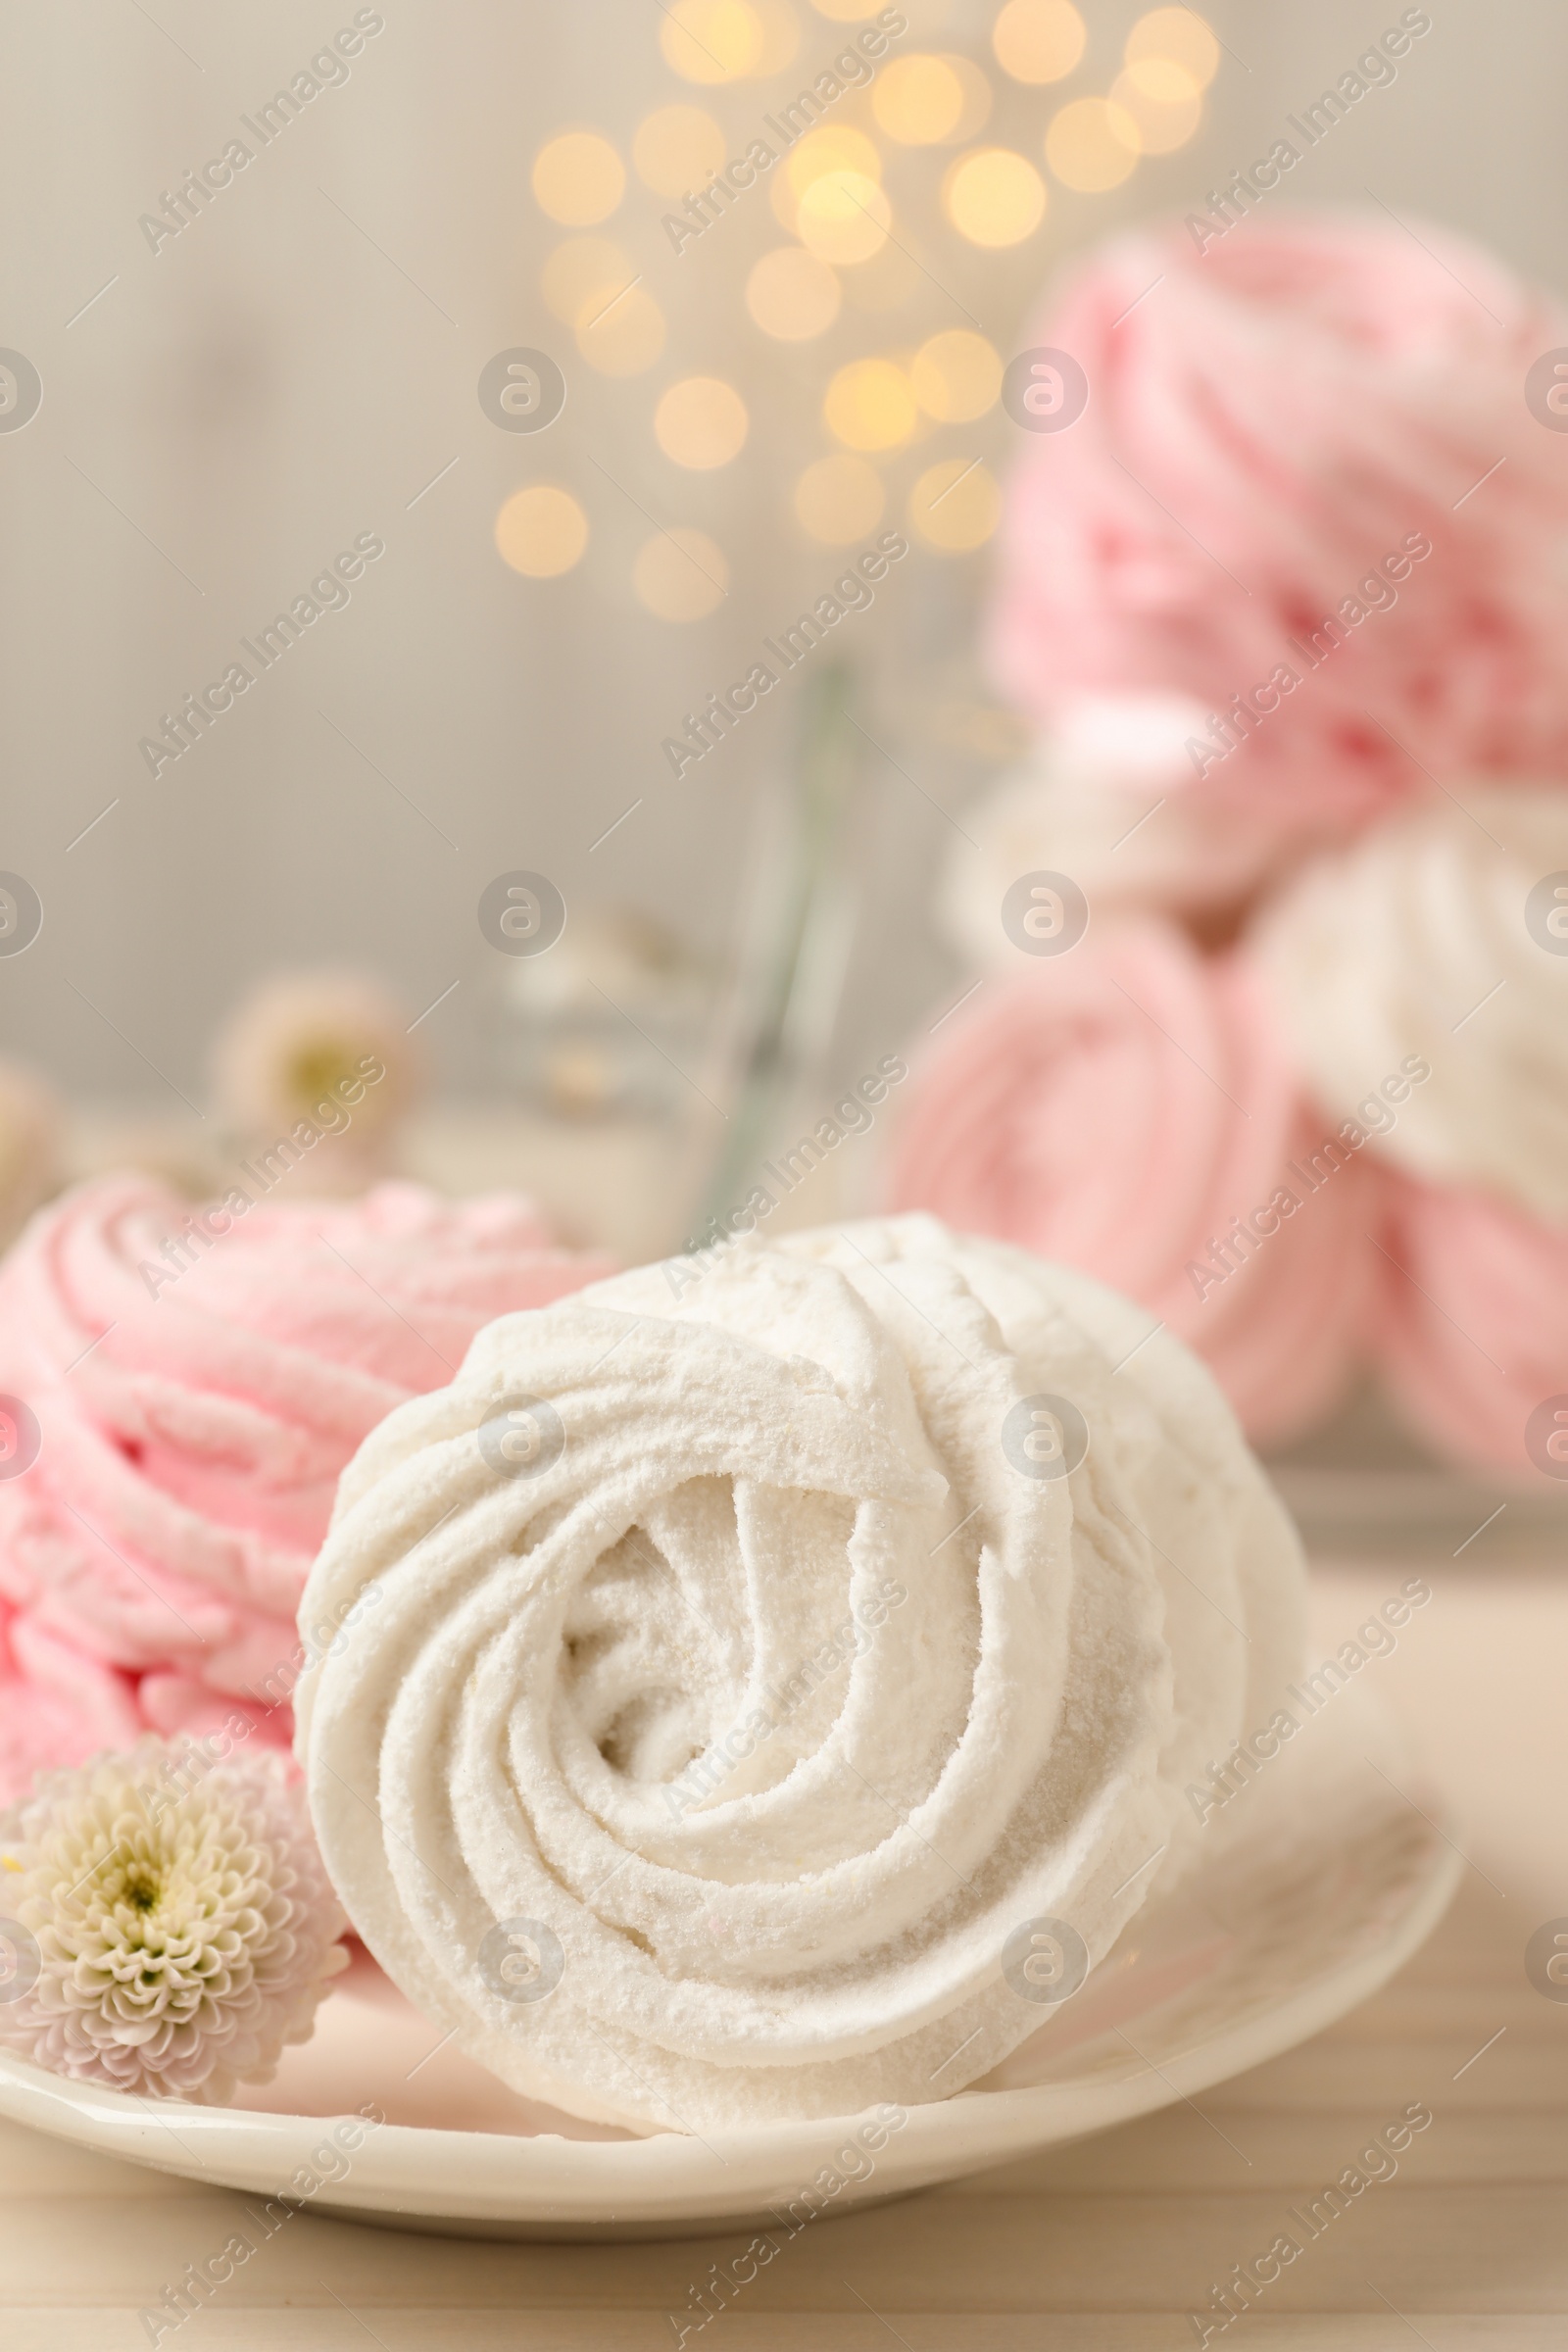 Photo of Delicious marshmallows on wooden table against blurred lights, closeup